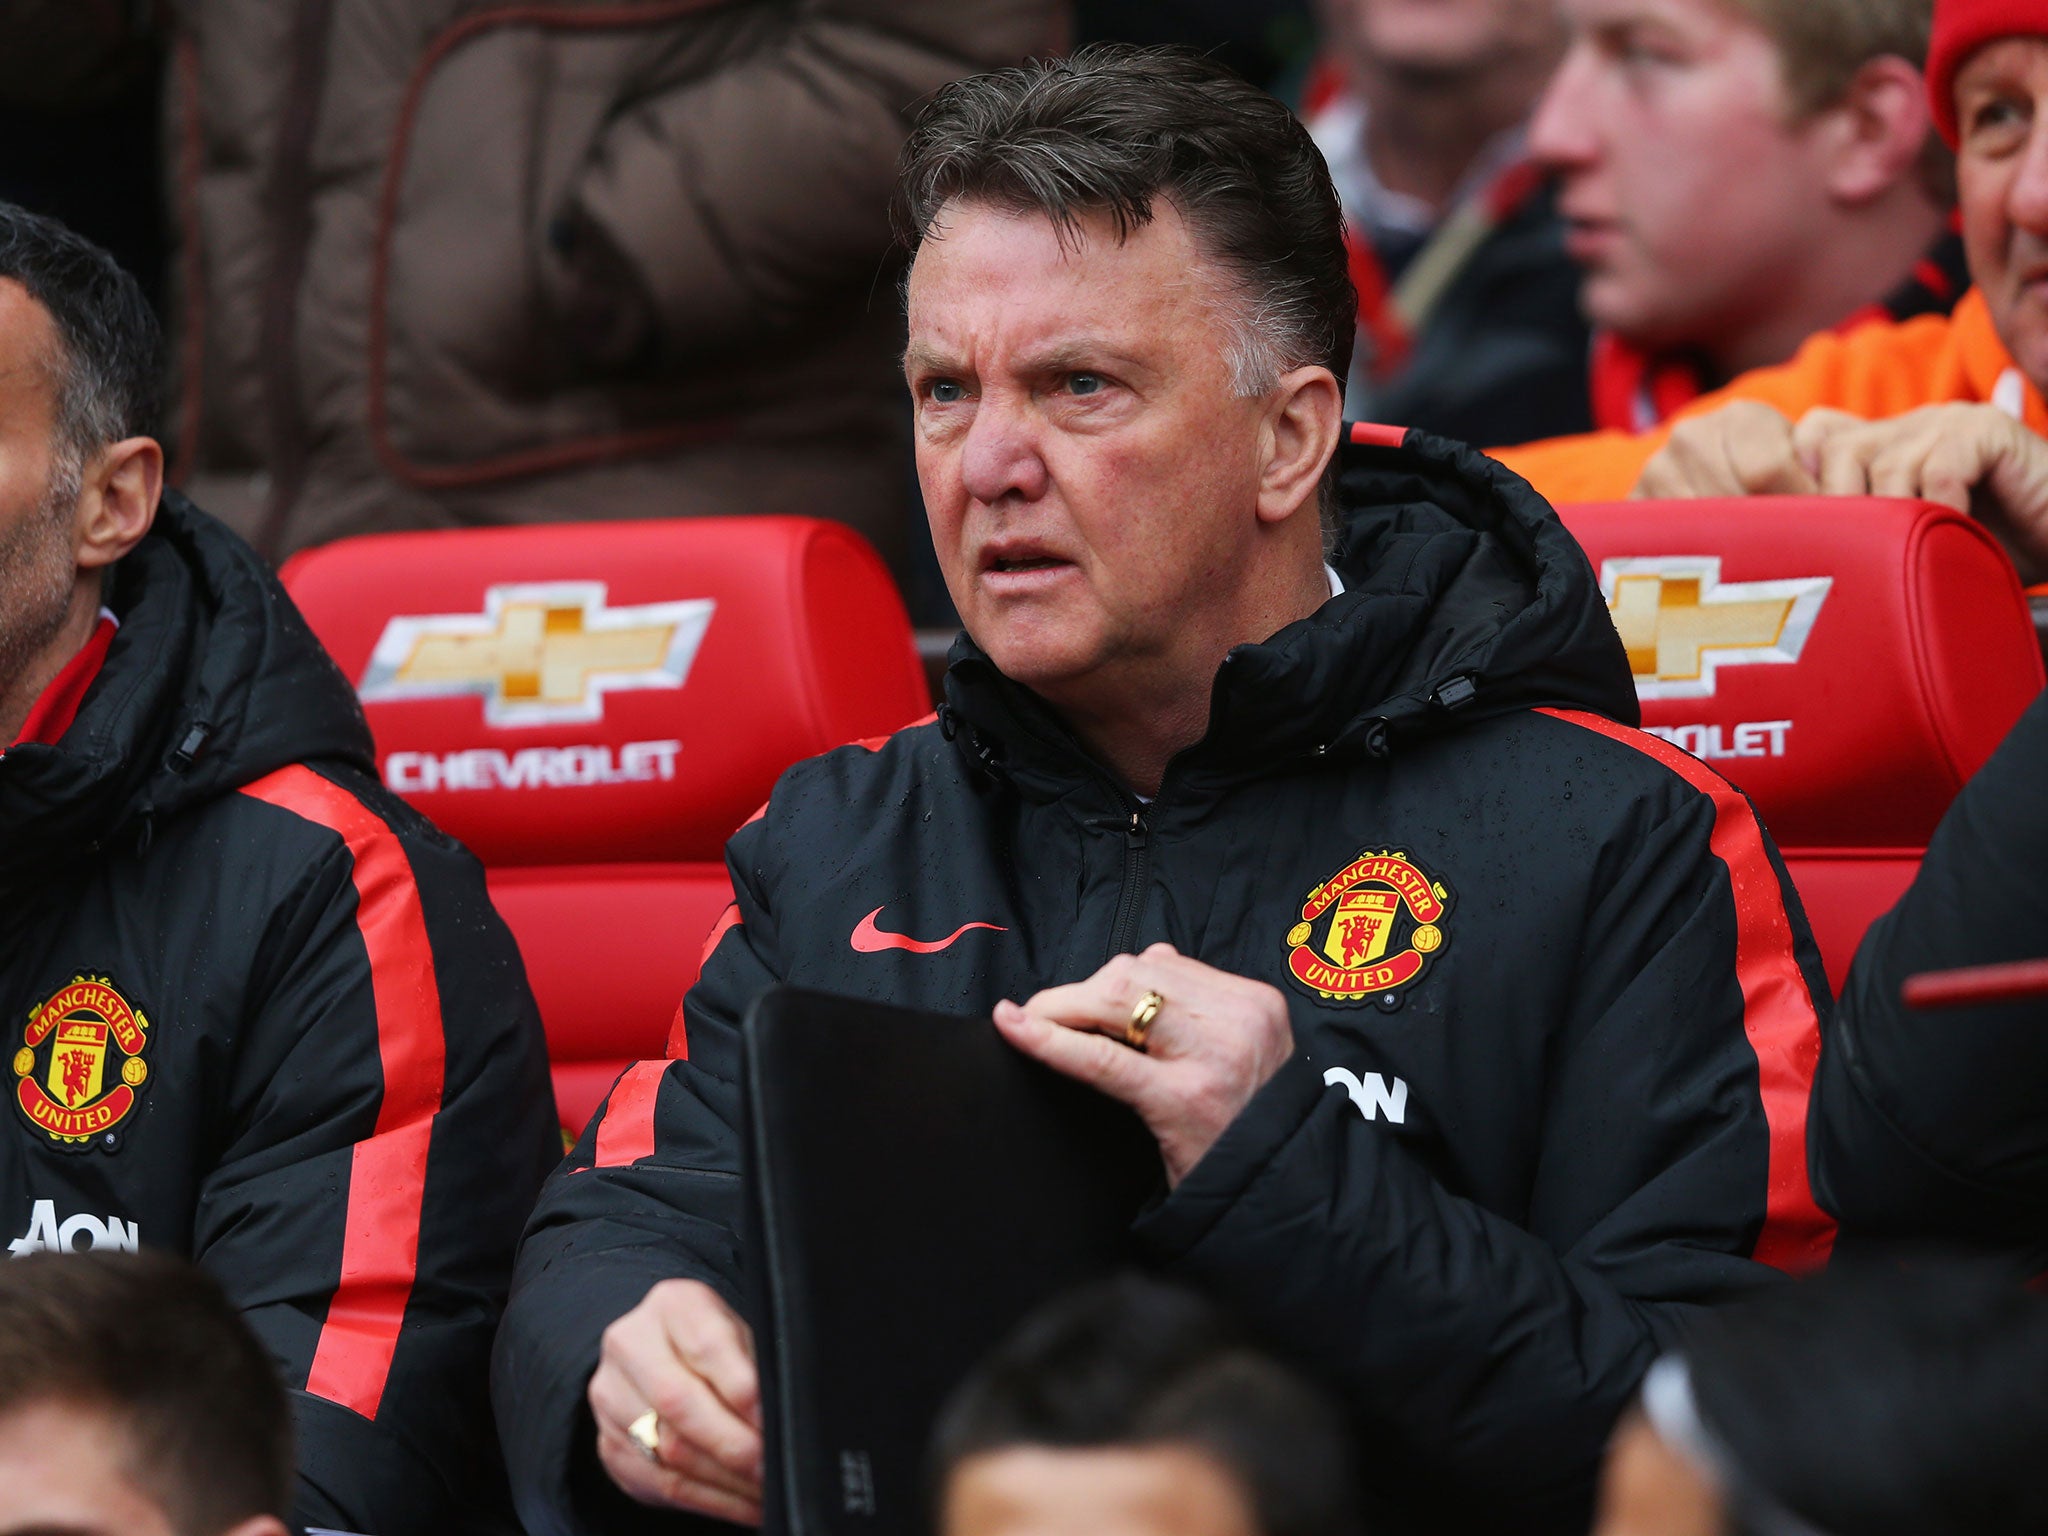 Van Gaal was not pleased with United's first 15 minutes against Manchester City